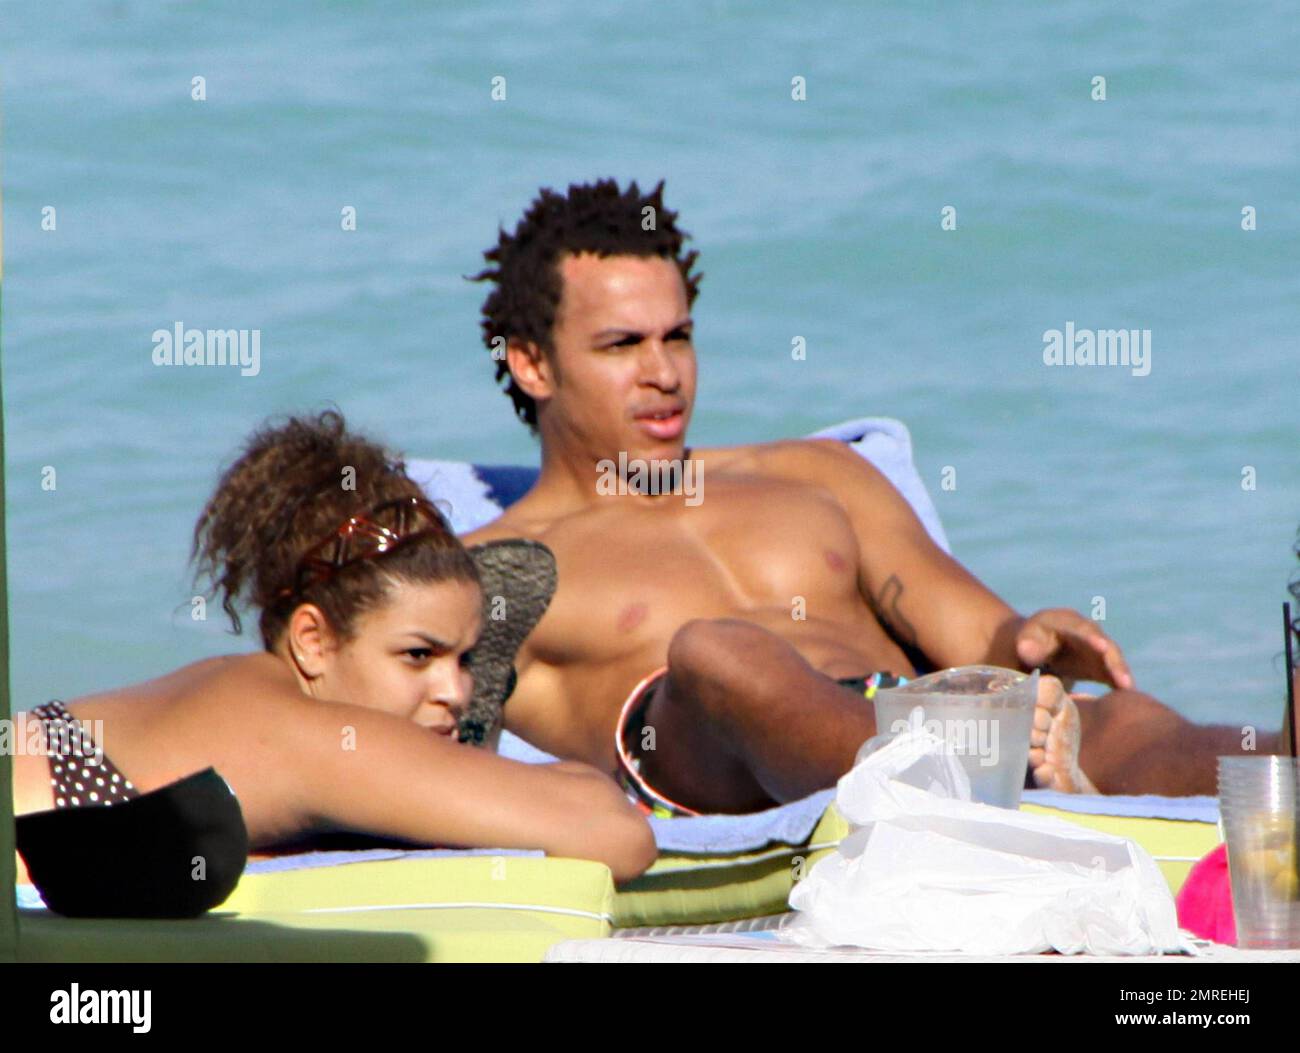 Jordin Sparks and boyfriend Steph Jones spend an afternoon at the beach  ahead of the Super Bowl. Hidden by a barricade of umbrellas and cabanas,  the pair relaxed in the sun amongst